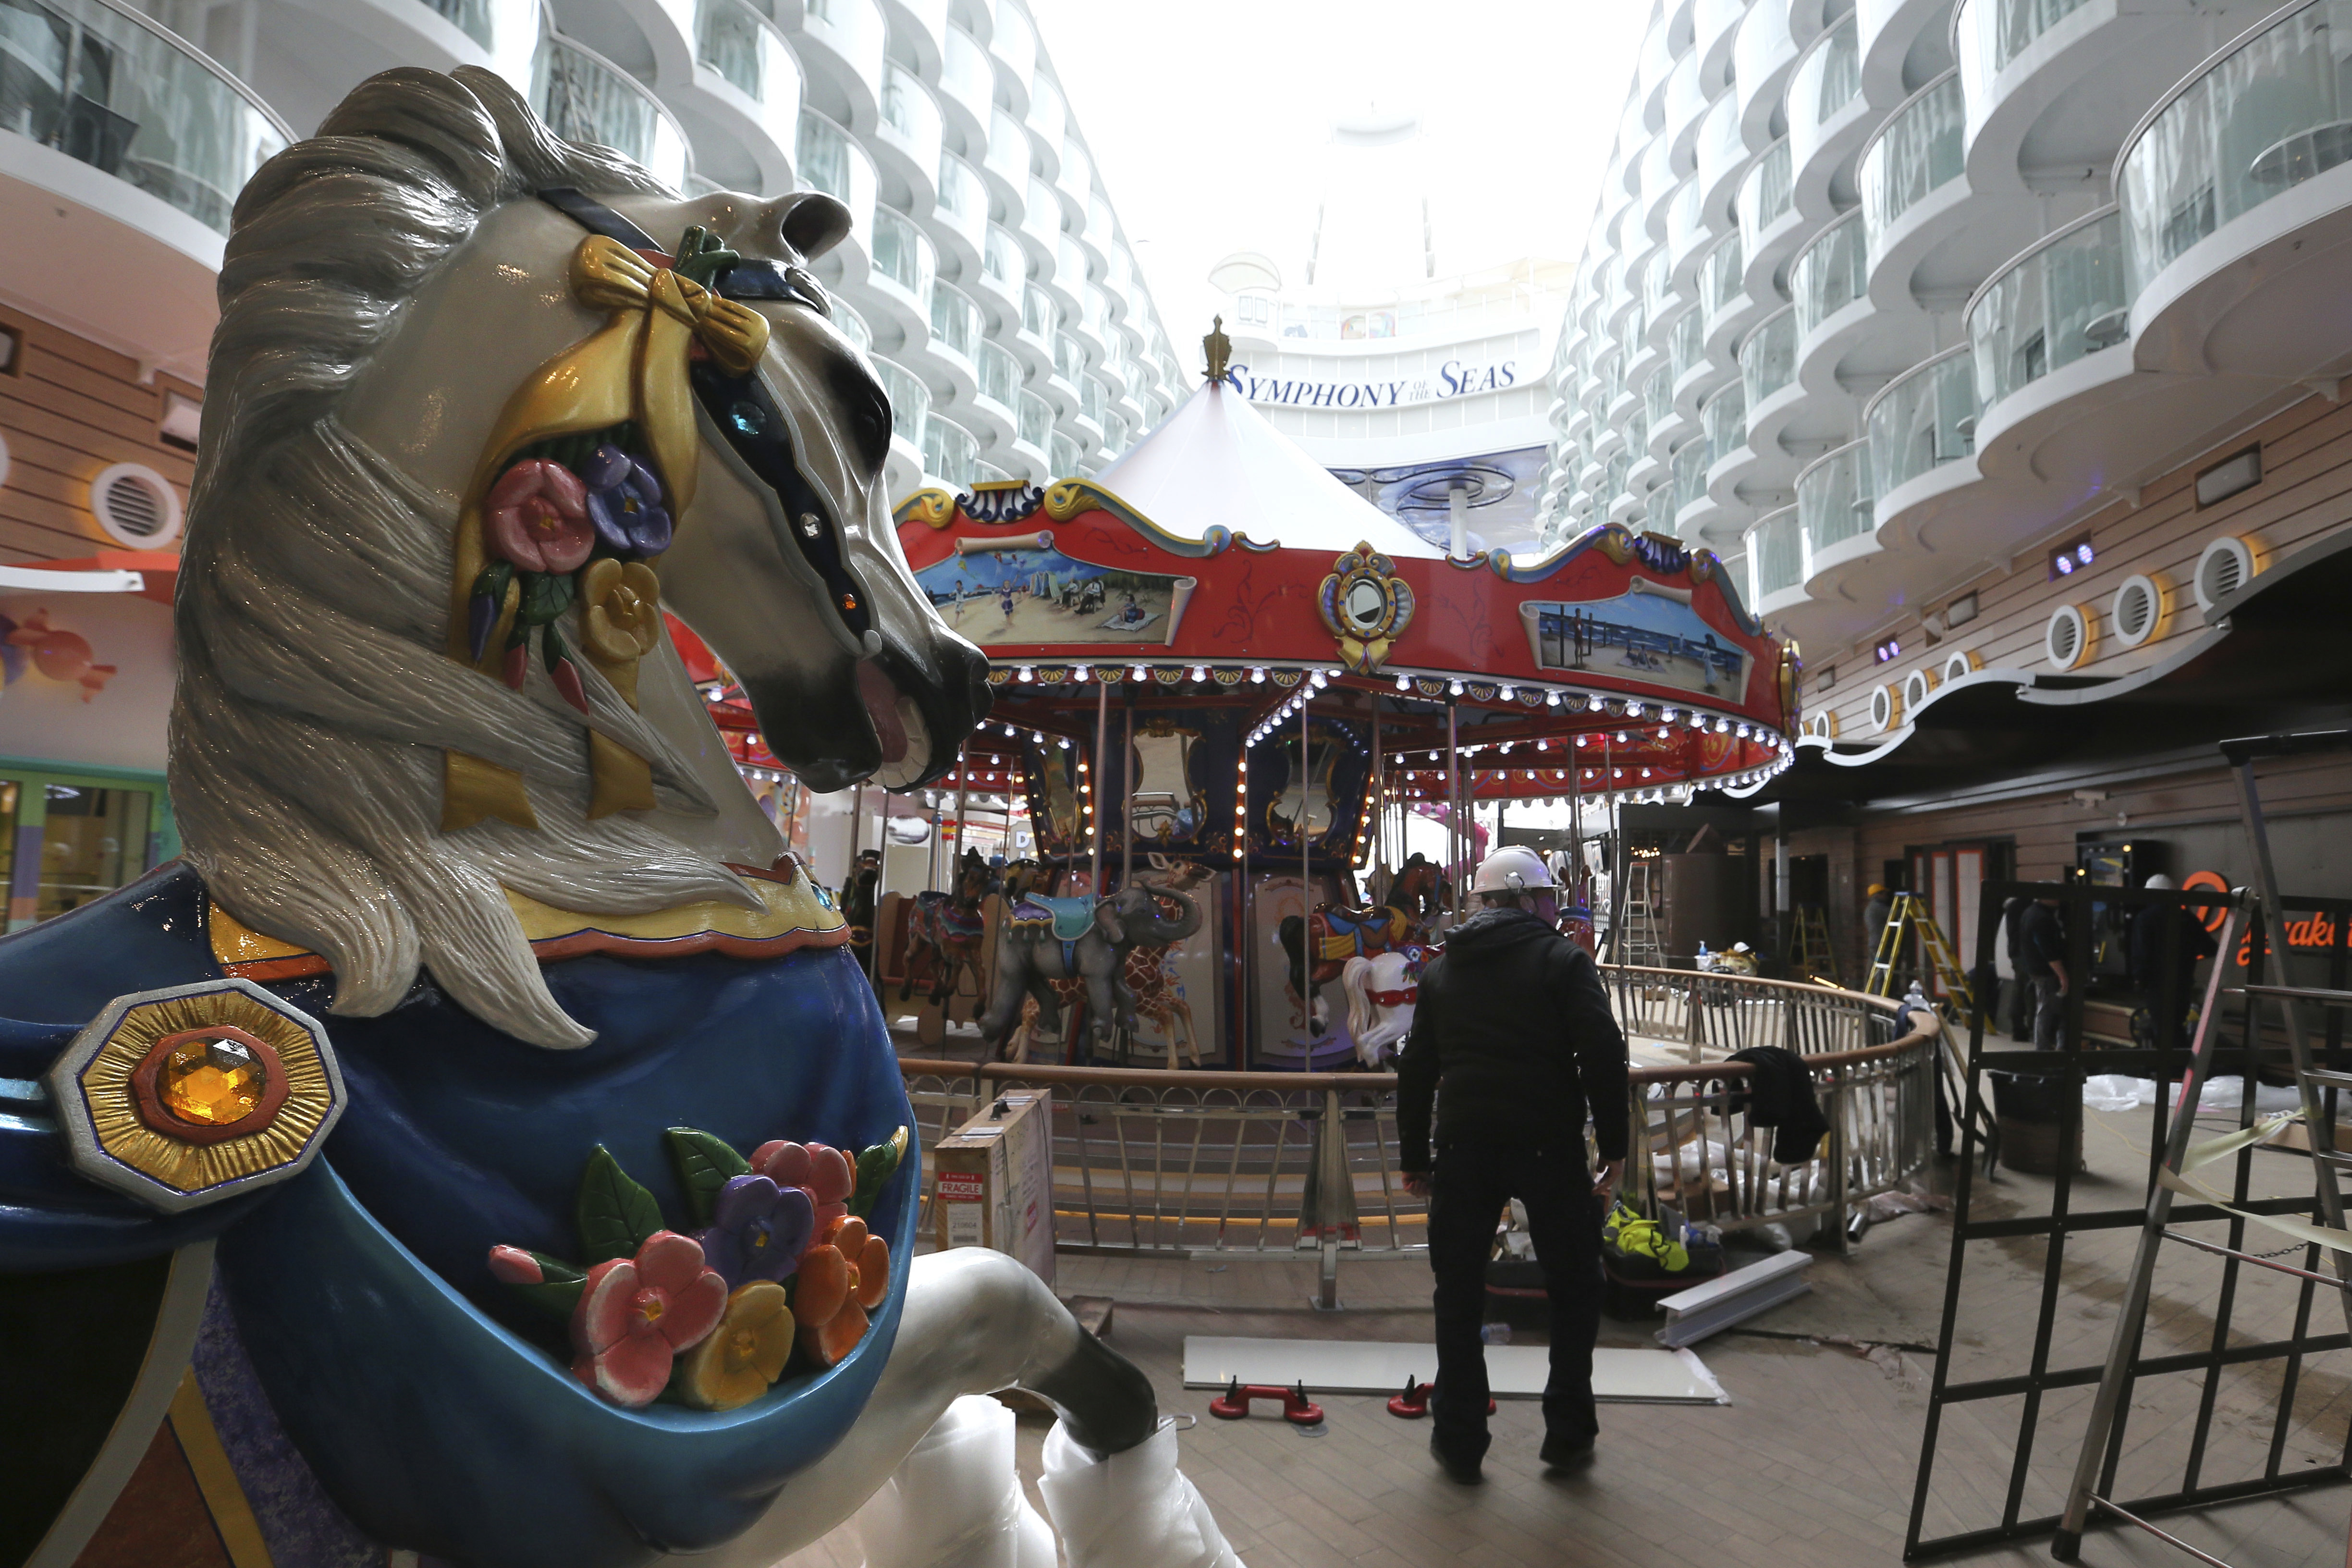 A carousel is pictured aboard The Symphony of the Seas docking at Saint Nazaire port, western France, Friday, March 23, 2018. Royal Caribbean International took delivery of the much-awaited, 228,081-ton Symphony of the Seas from the French shipyard STX. (AP Photo/David Vincent)